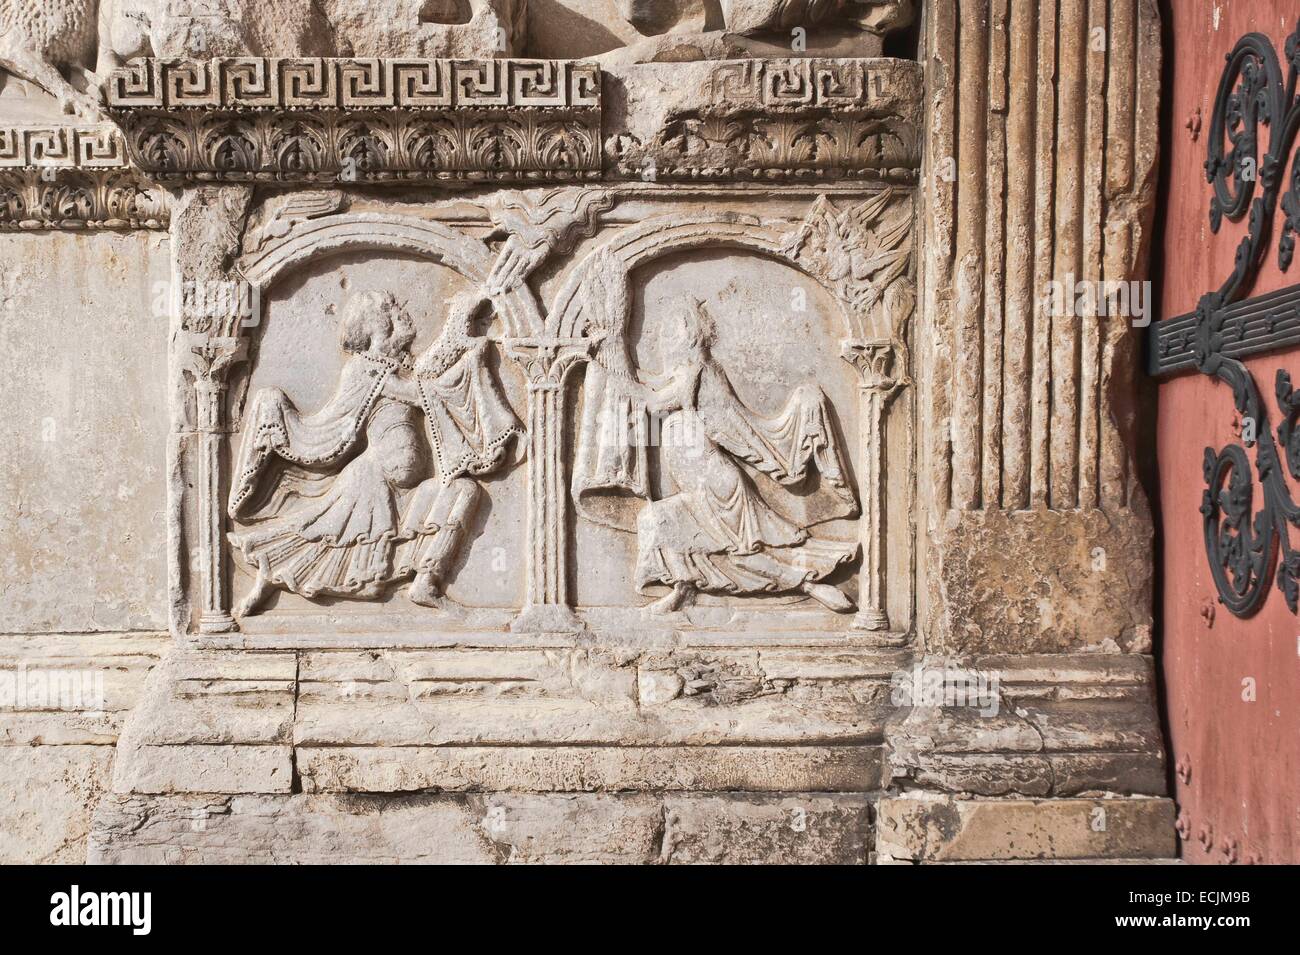 France, Gard, Saint Gilles, 12th-13th century abbey, listed as World Heritage by UNESCO under the road to St Jacques de Compostela in France, Provencal Romanesque style, left pillar of the central portal, Table Cain right offering to the Lord a sheaf of w Stock Photo